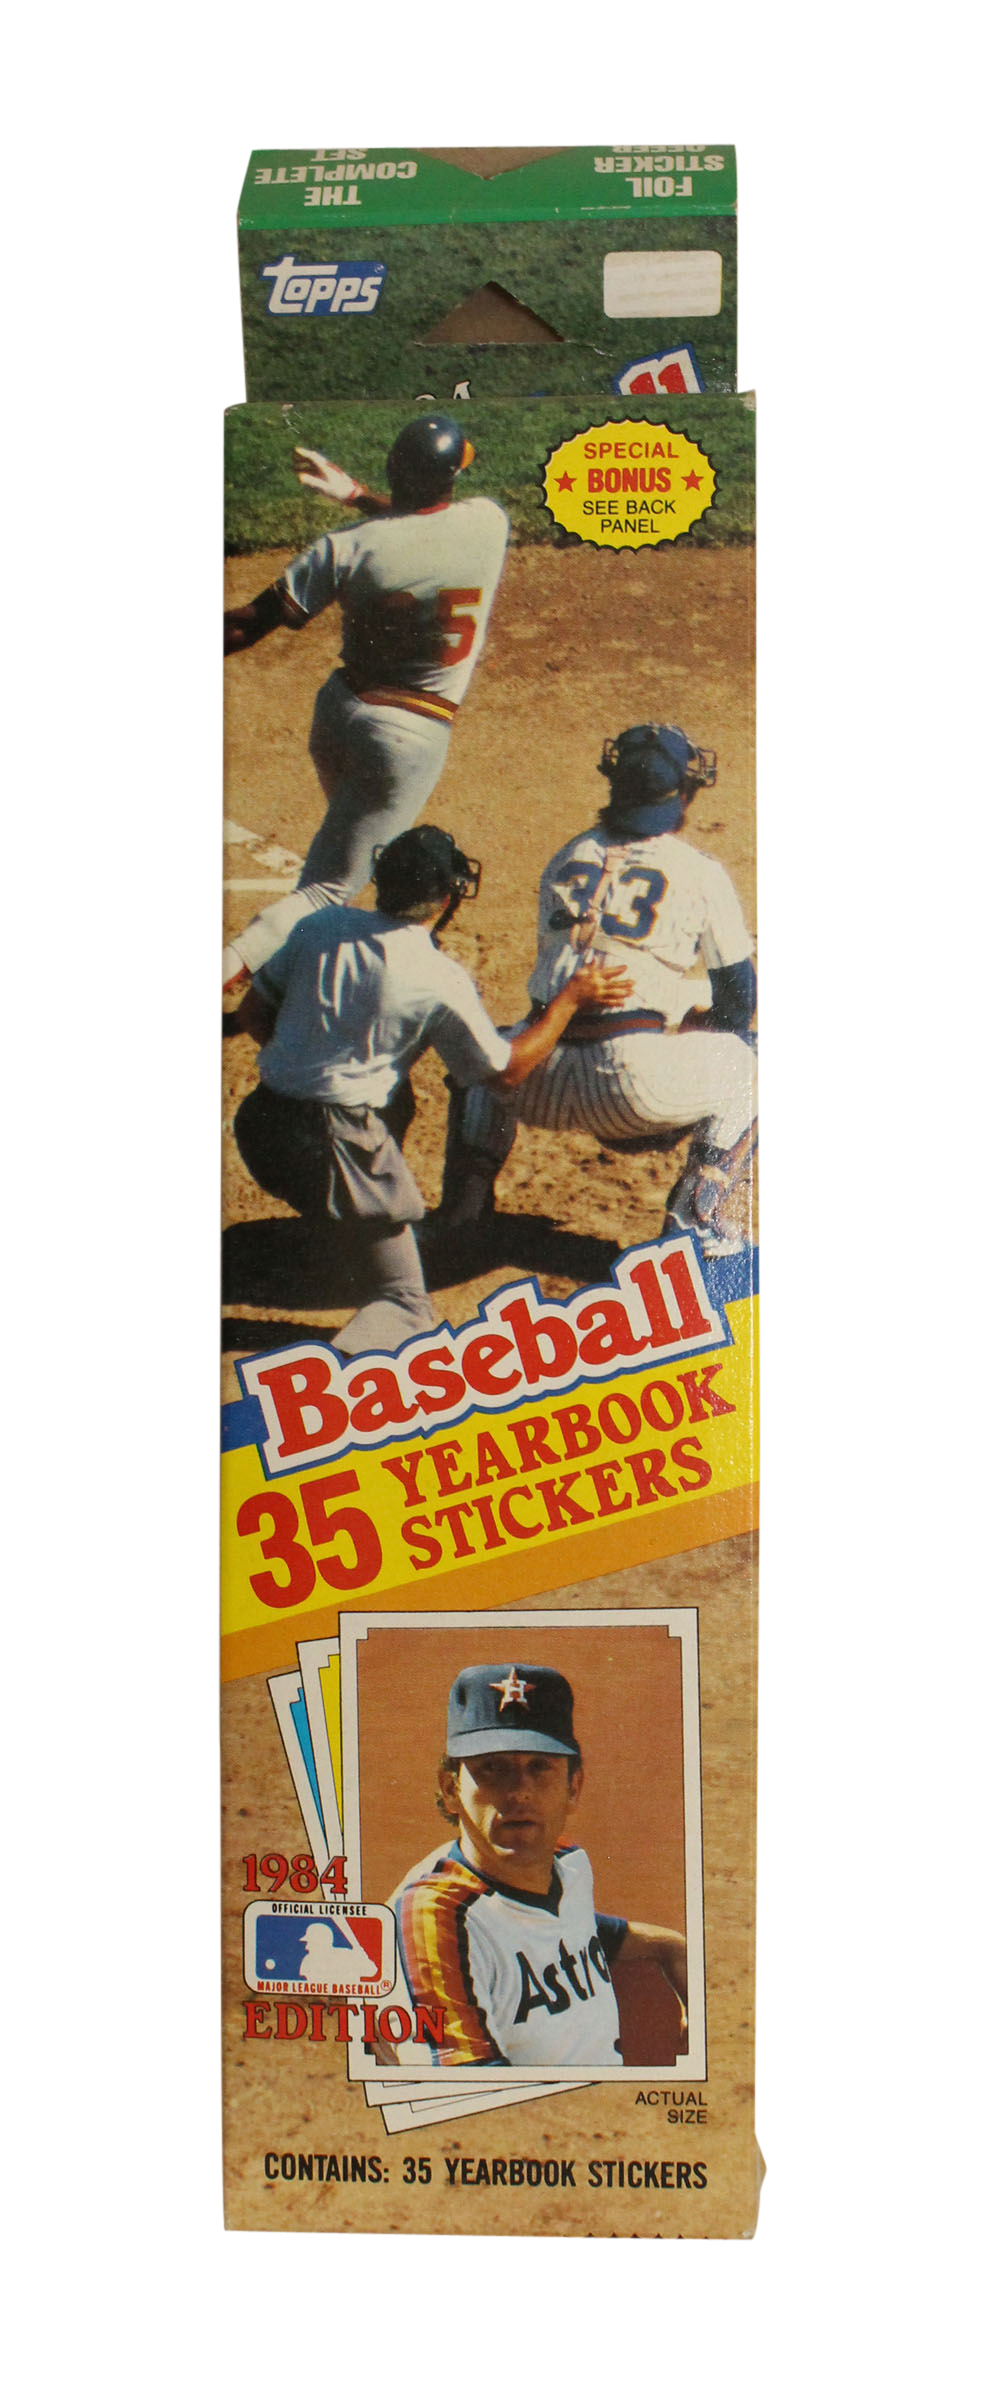 1984 MLB Yearbook Stickers 35 Stickers